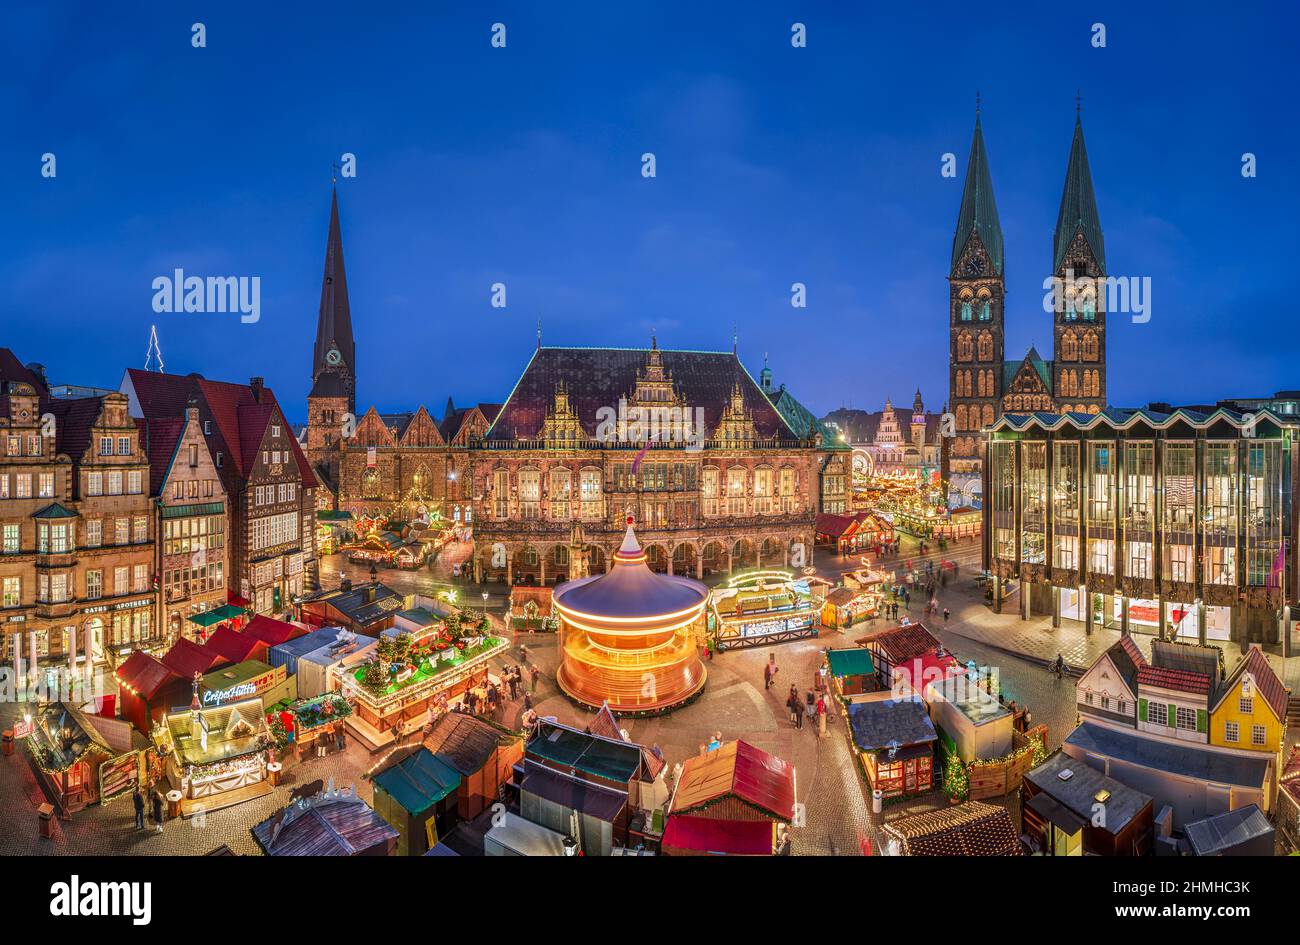 Christmas market in Bremen, Germany at night Stock Photo